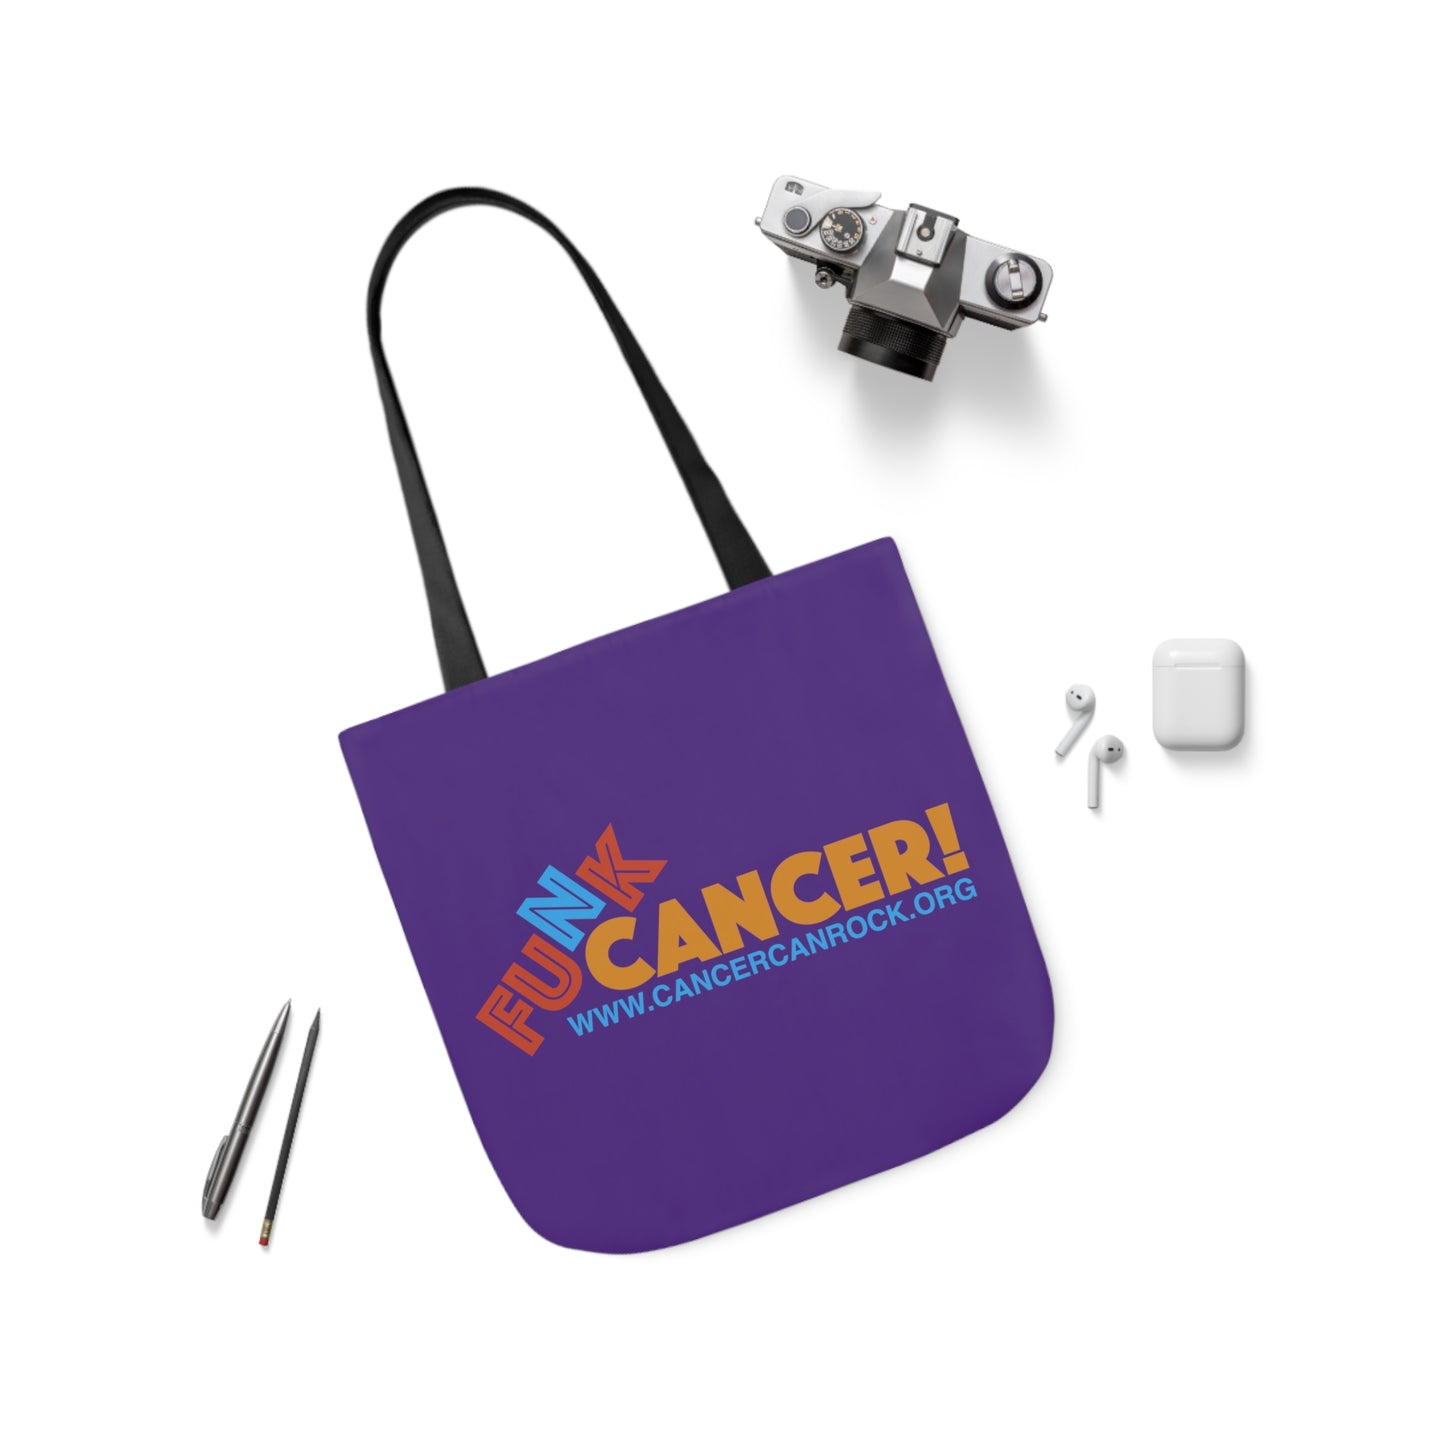 Tote Bag - Poly Canvas - FUNK Cancer